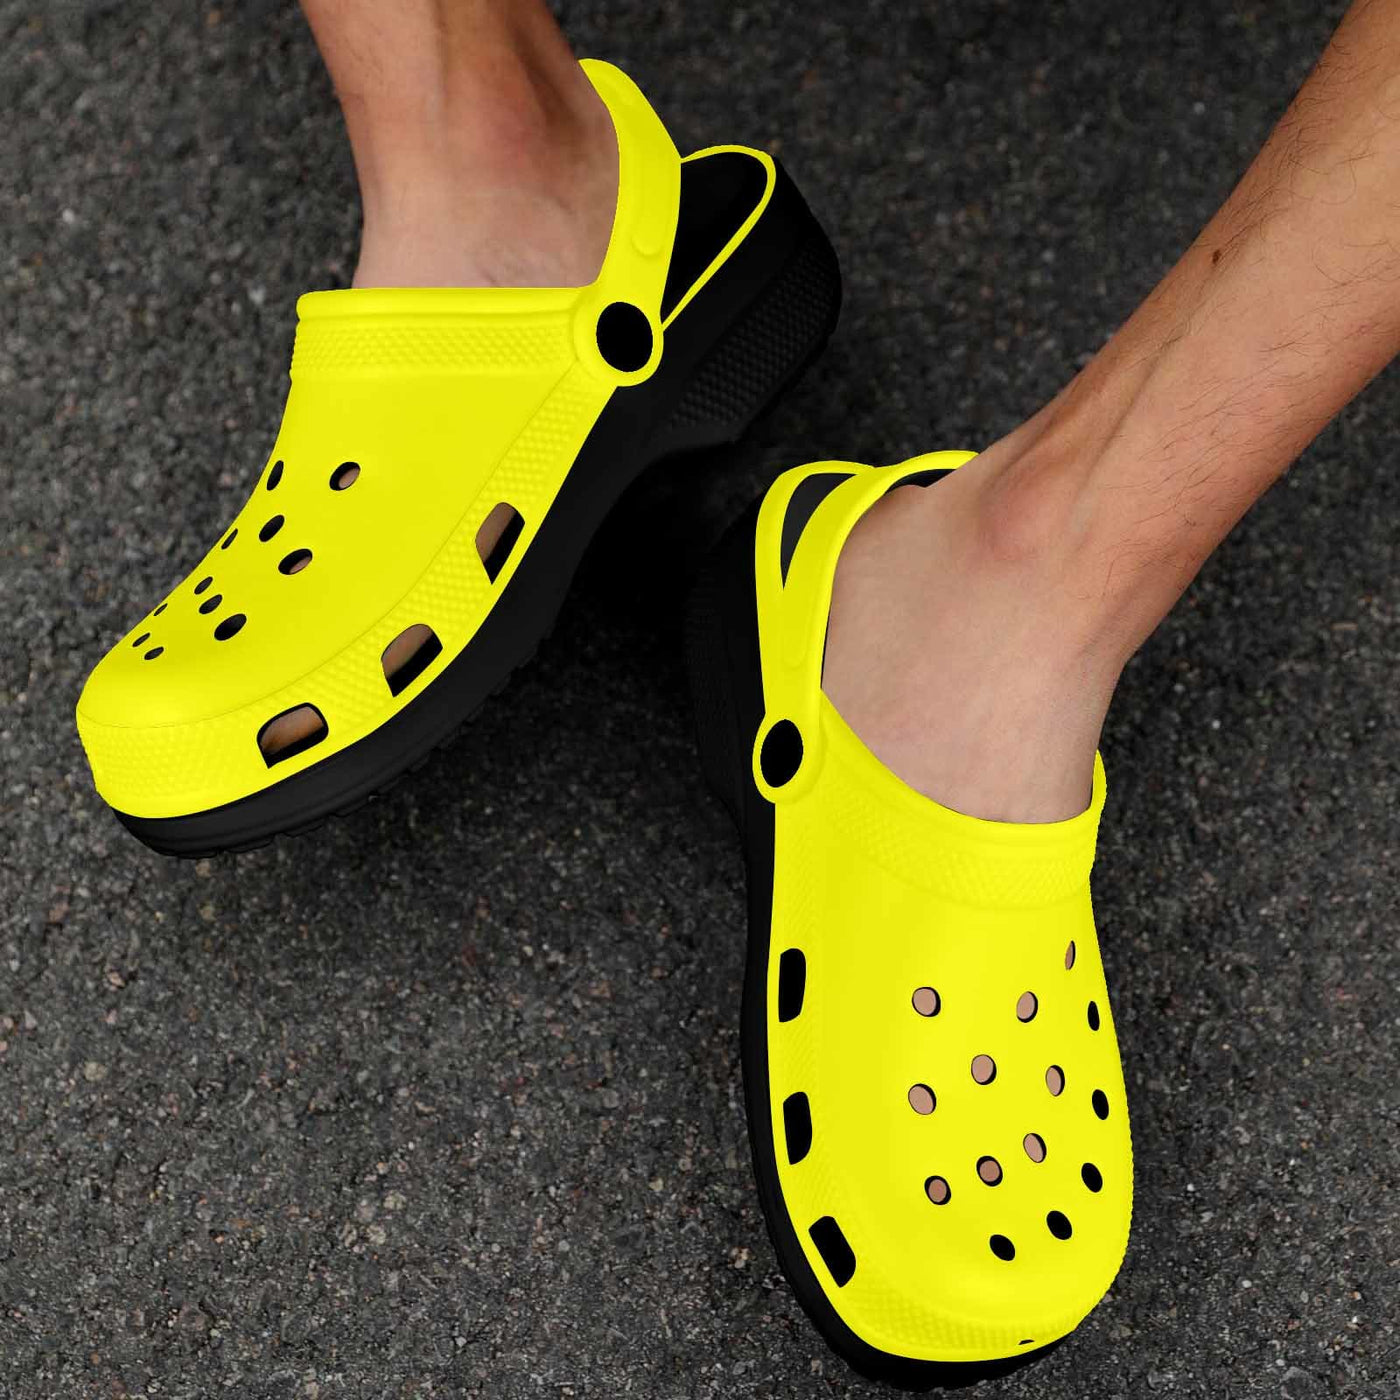 Yellow Adult Clogs - Unisex | Clogs | Adults